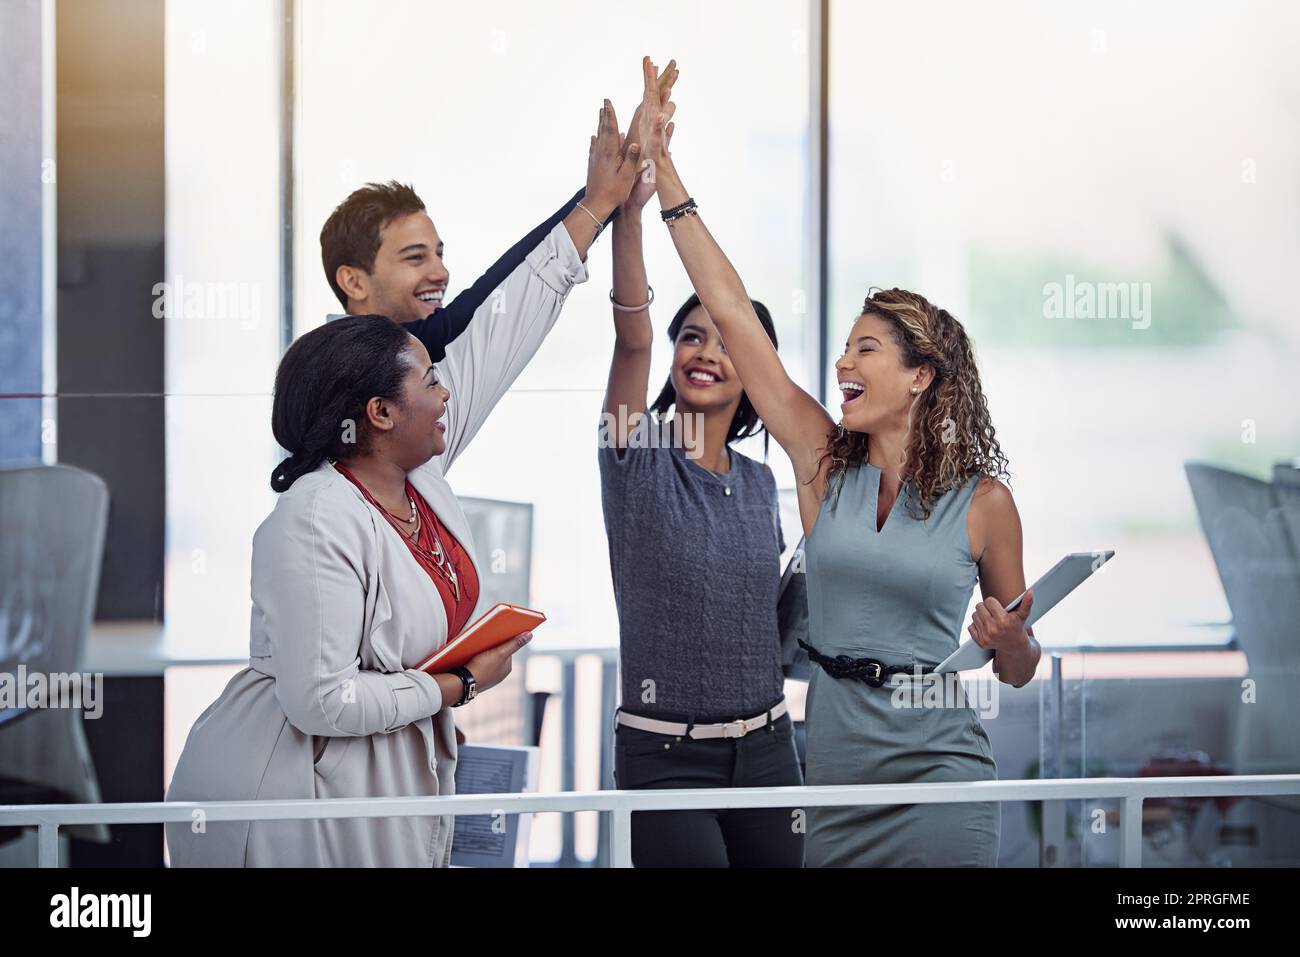 Teamwork makes the dream work. a group of colleagues high fiving together in an office. Stock Photo